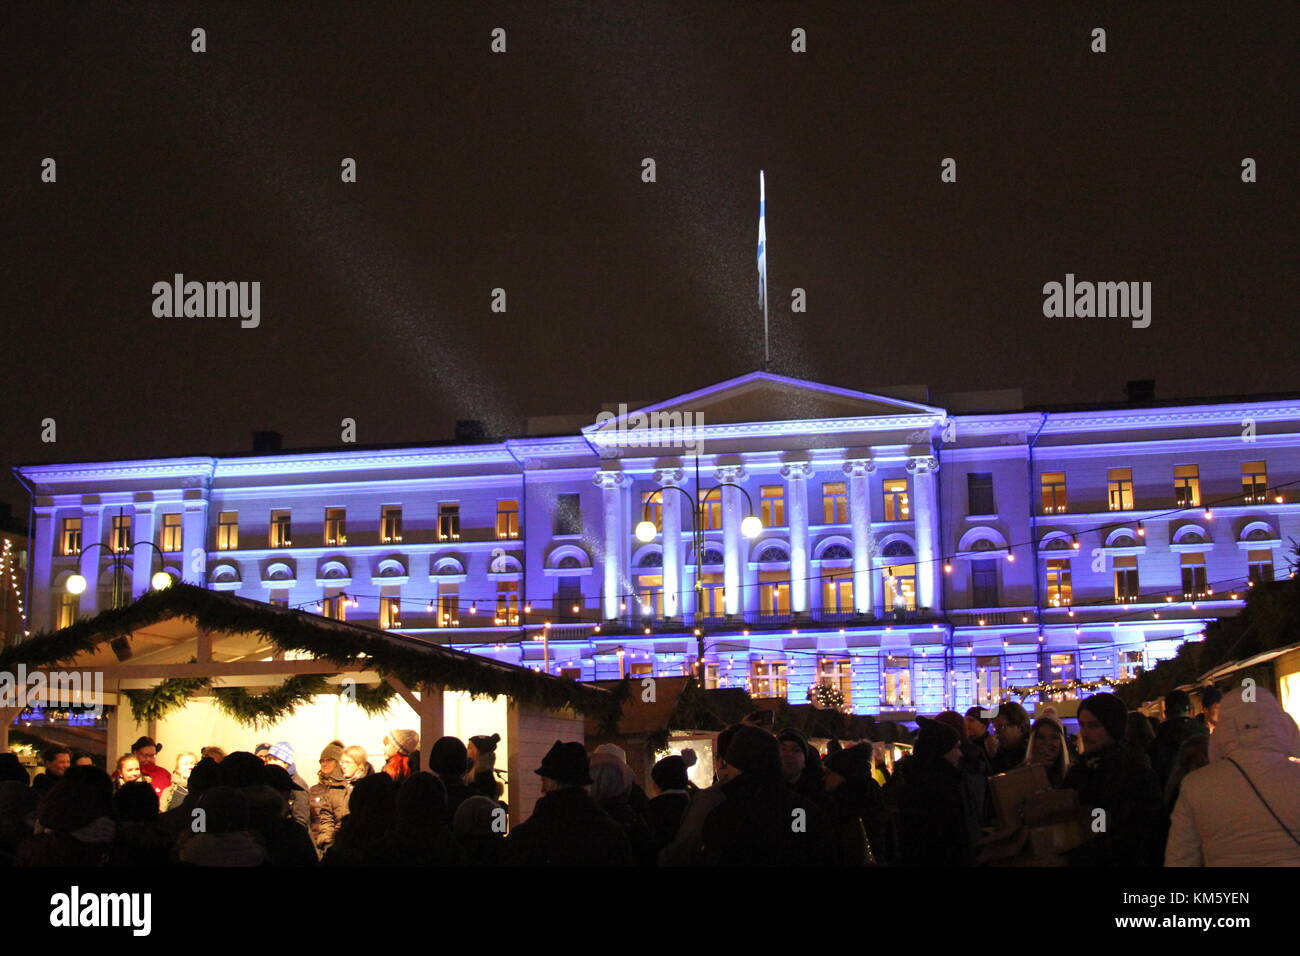 Senate Square, Helsinki, Finland. 05th Dec, 2017. Blue and white illumination celebrates Finland's 100 years of independence on 6th December. Credit: Heini Kettunen/Alamy Live News Stock Photo